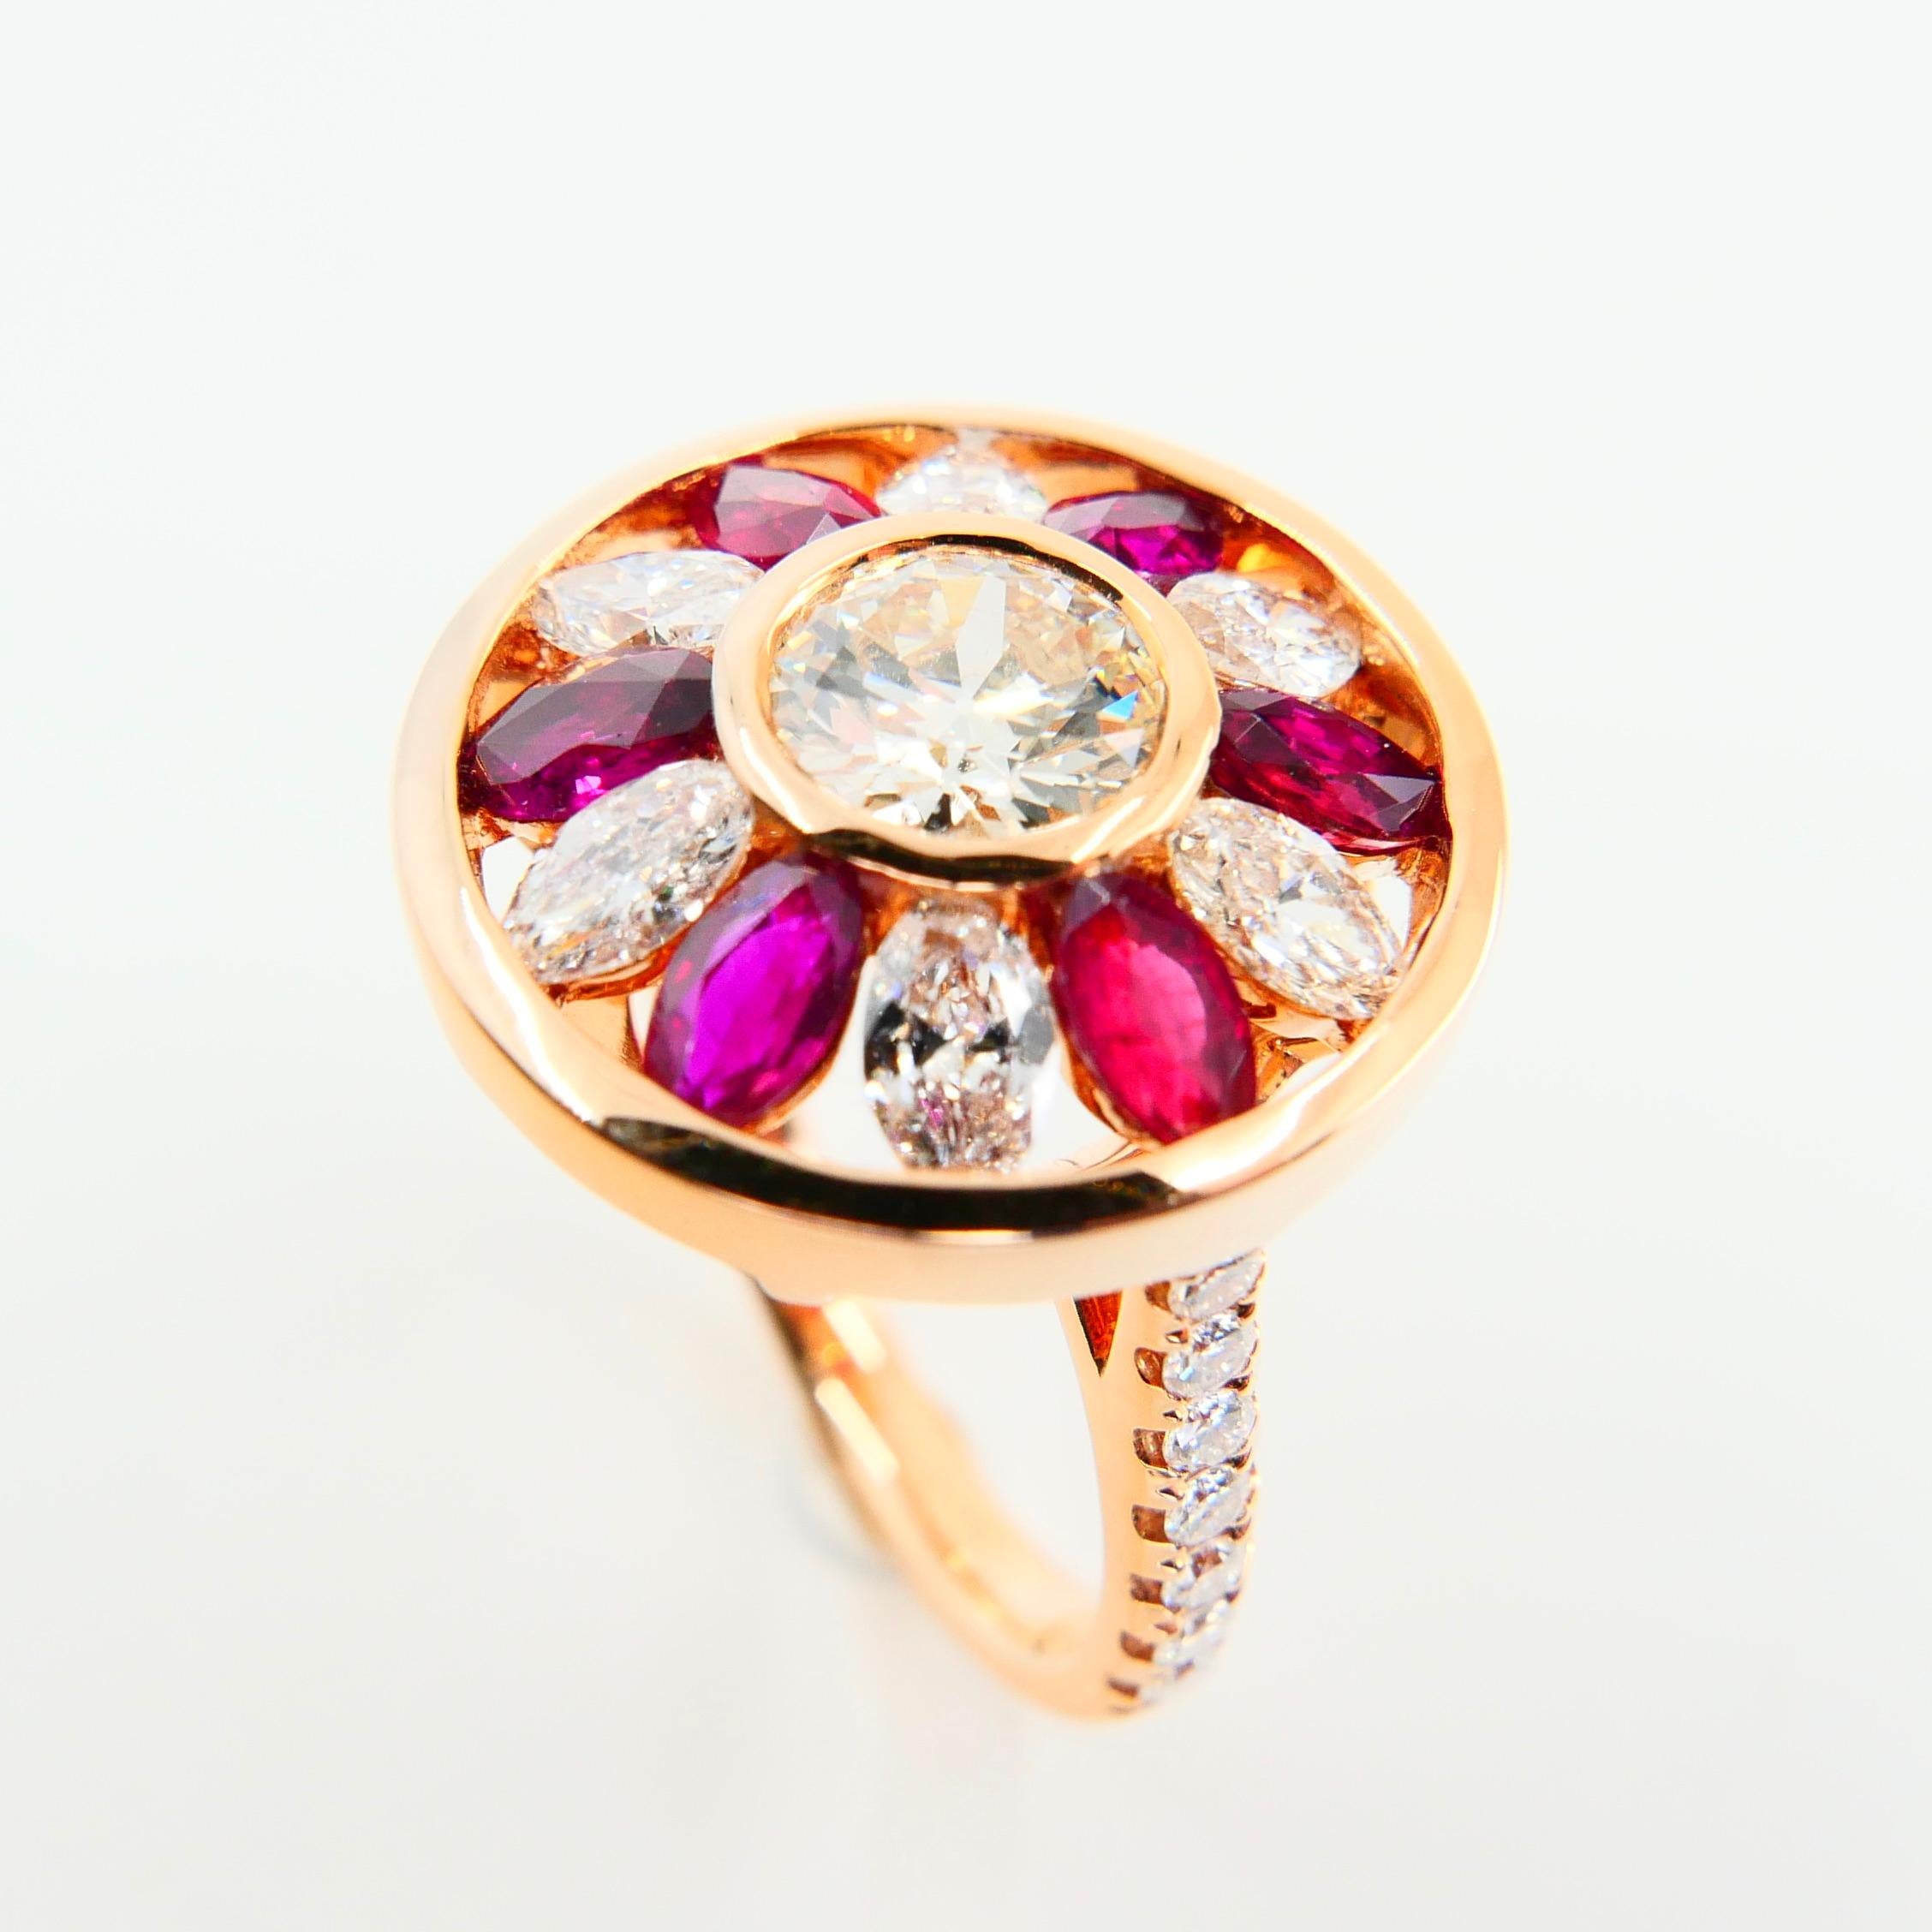 Women's Certified 1.53 Cts Natural Burma Ruby & Old Cut Diamond Ring, 18K Rose Gold